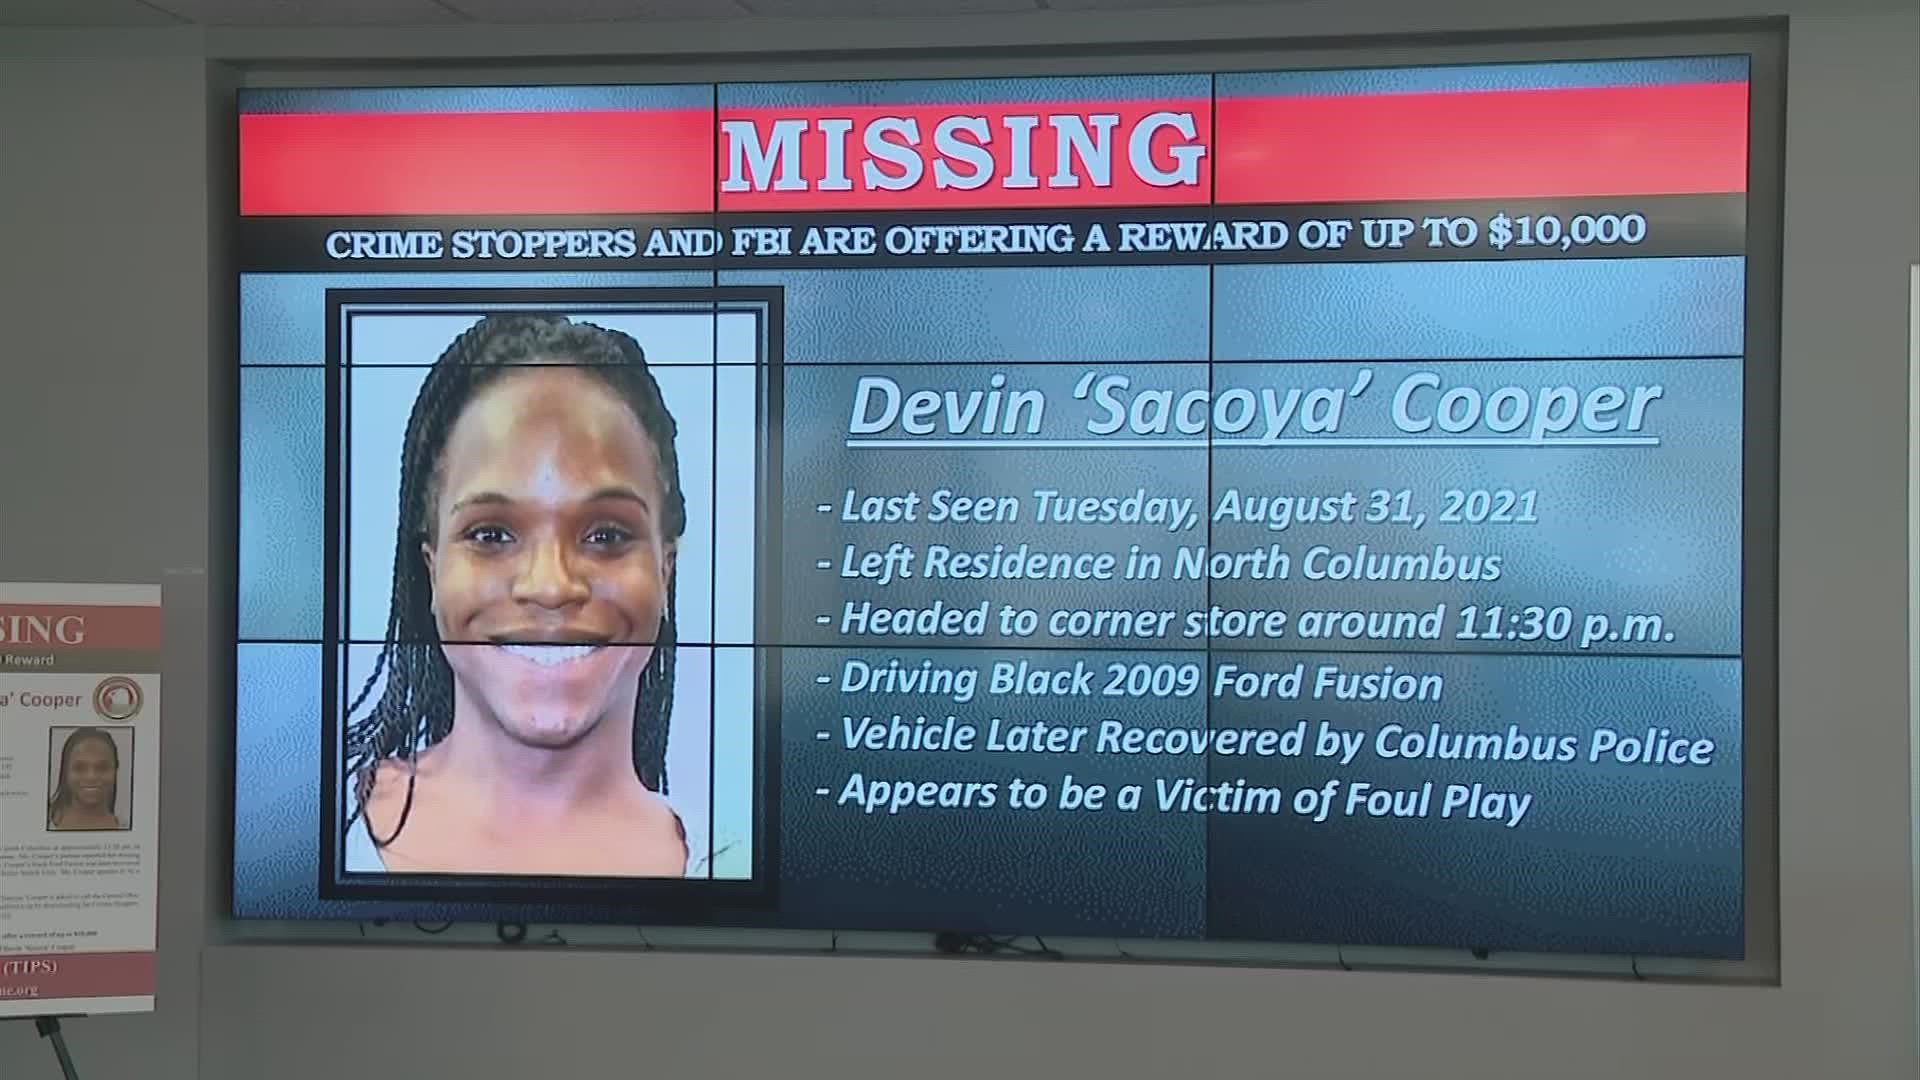 The Central Ohio Crime Stoppers, partnering with the FBI, is offering a reward of up to $10,000 for information on the whereabouts of Devin 'Sacoya' Cooper.